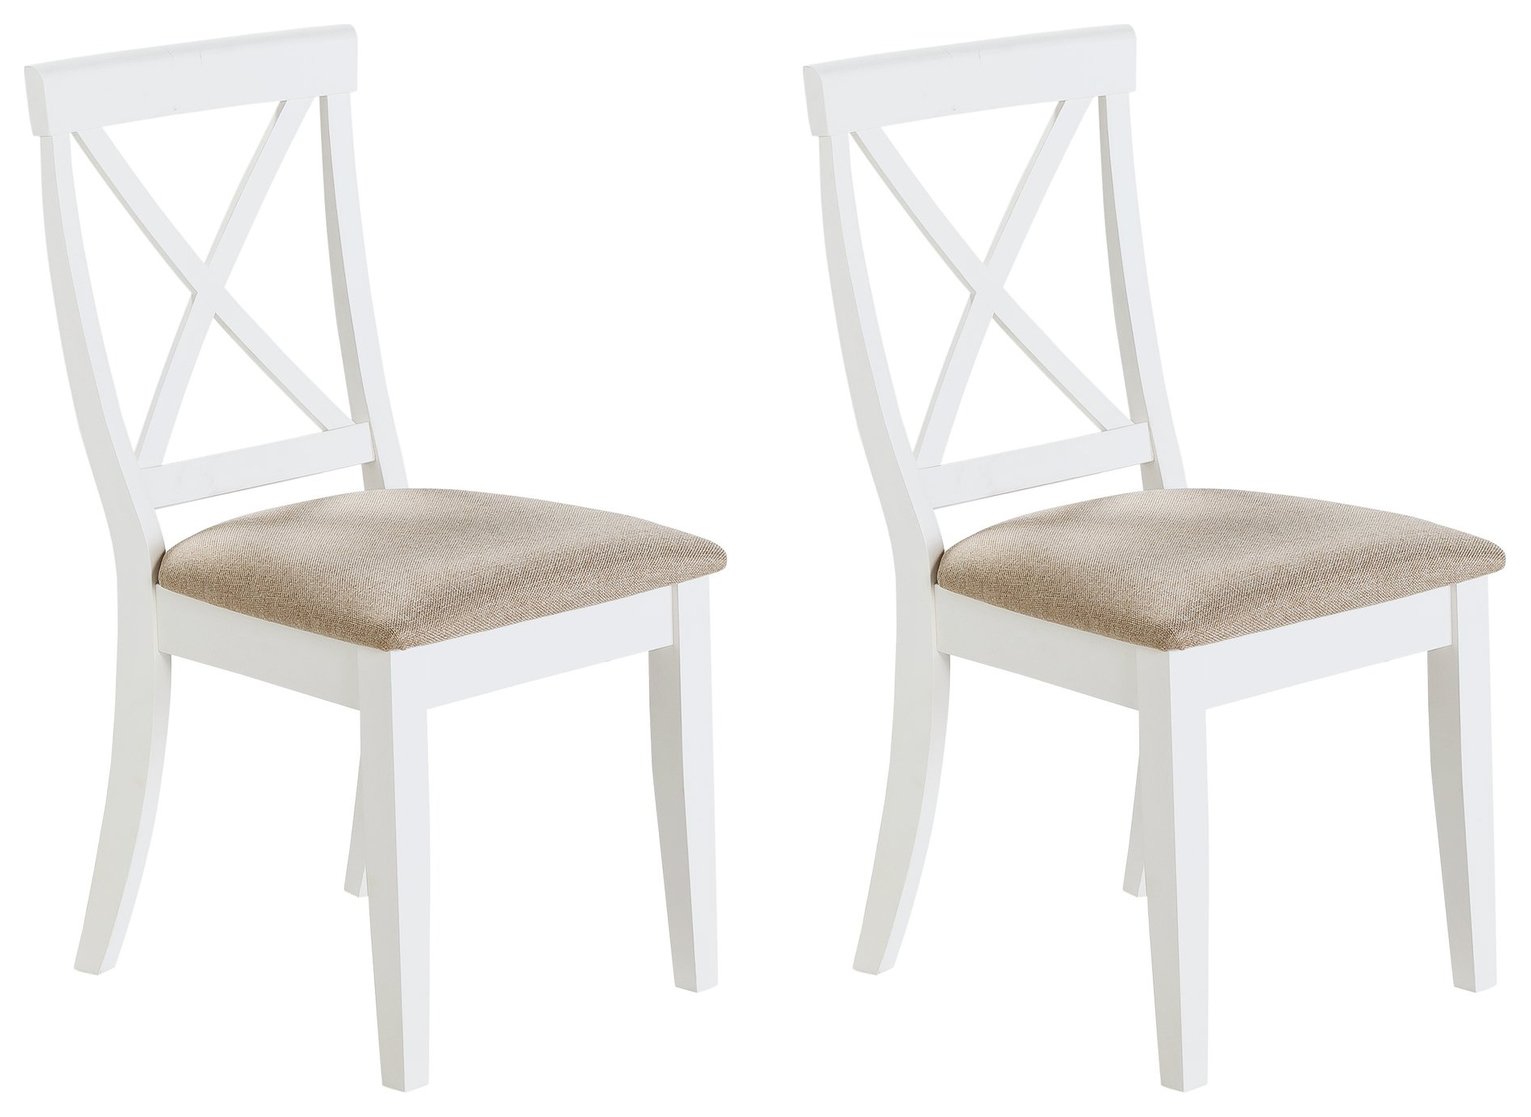 Argos Home Southwold Pair of Solid Wood Chairs - Two Tone